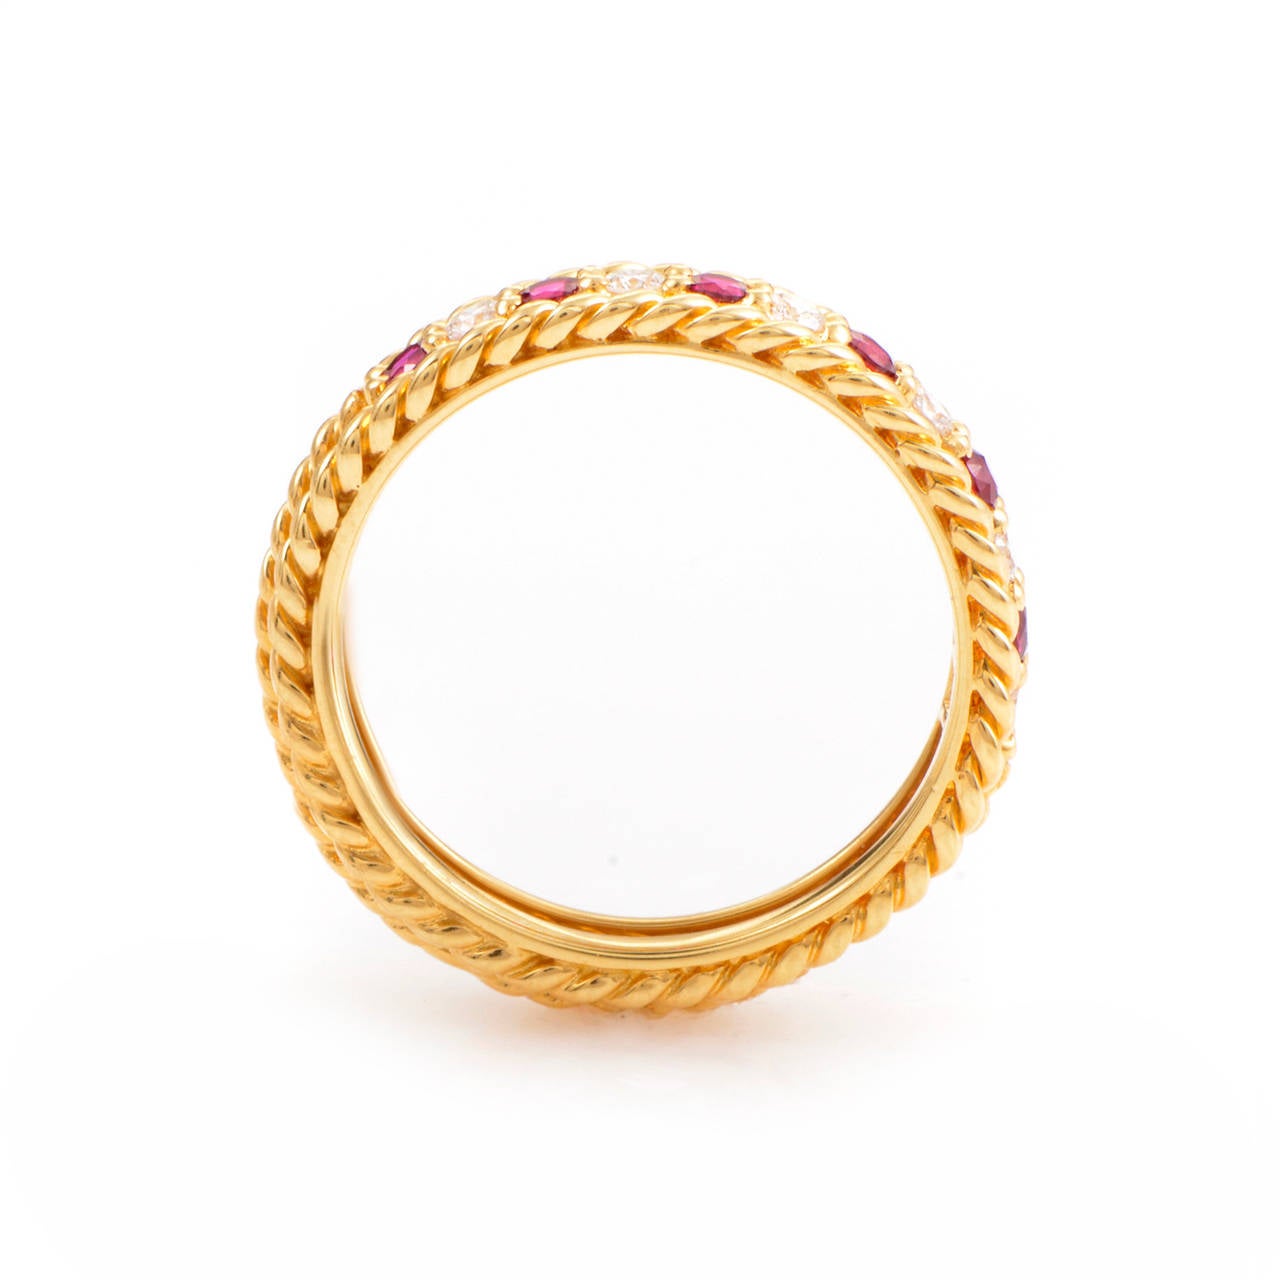 This band ring from Dior has an enduring quality that will keep it in fashion for many years to come. The ring is made of 18K yellow gold and is set with ~.35ct of rubies as well as ~.30ct of shimmering white diamonds.
Included Items: Manufacturer's